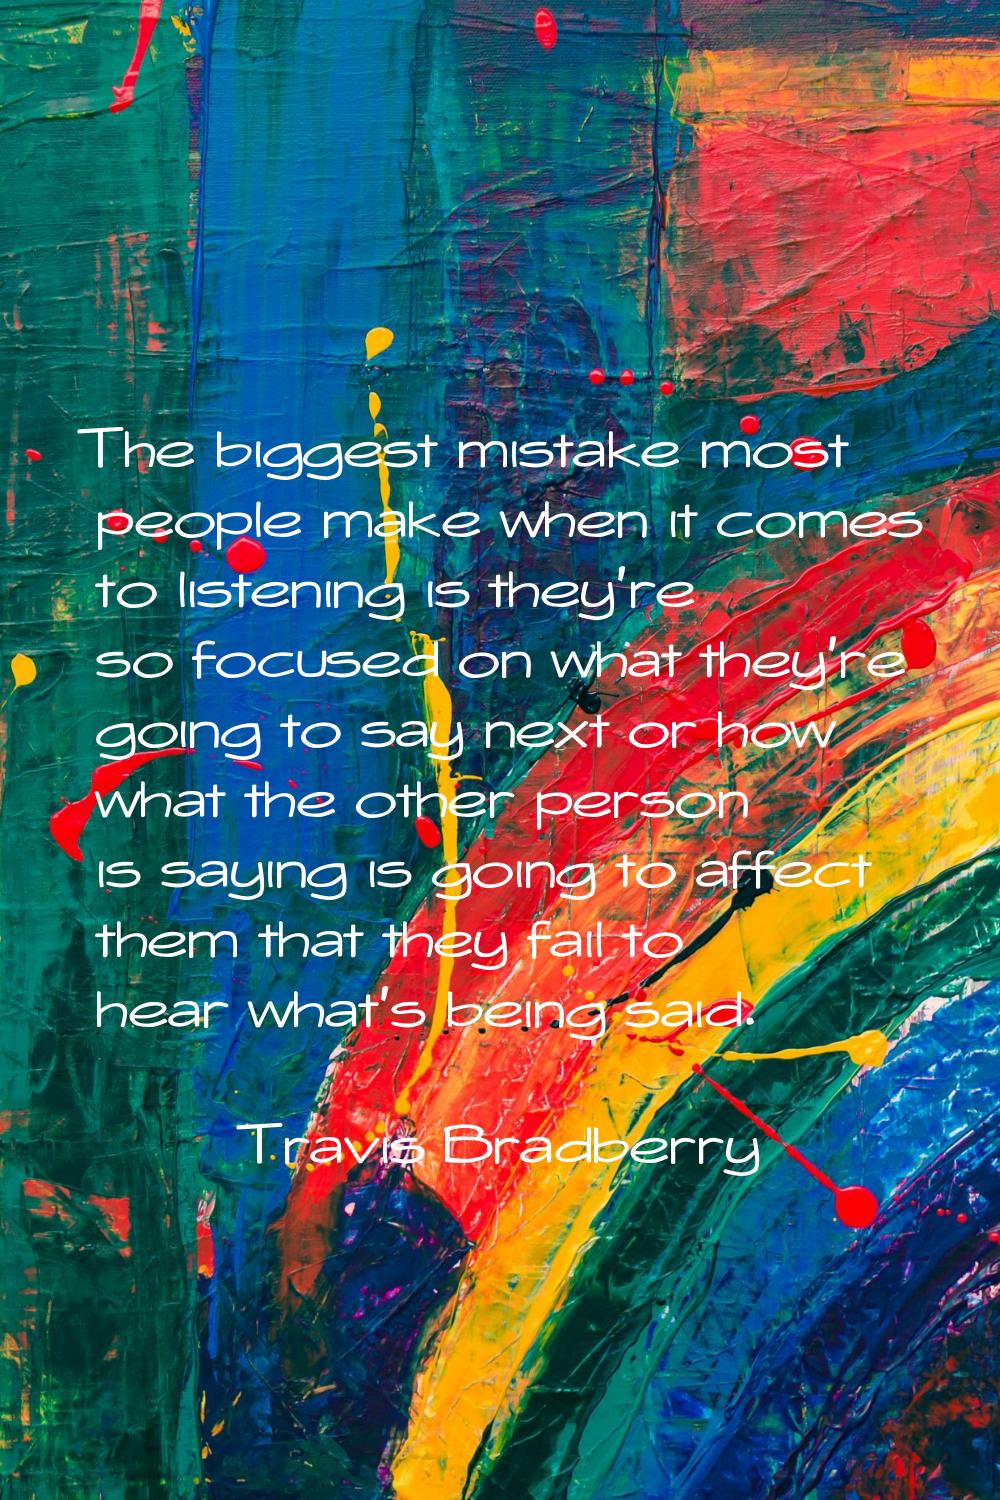 The biggest mistake most people make when it comes to listening is they're so focused on what they'